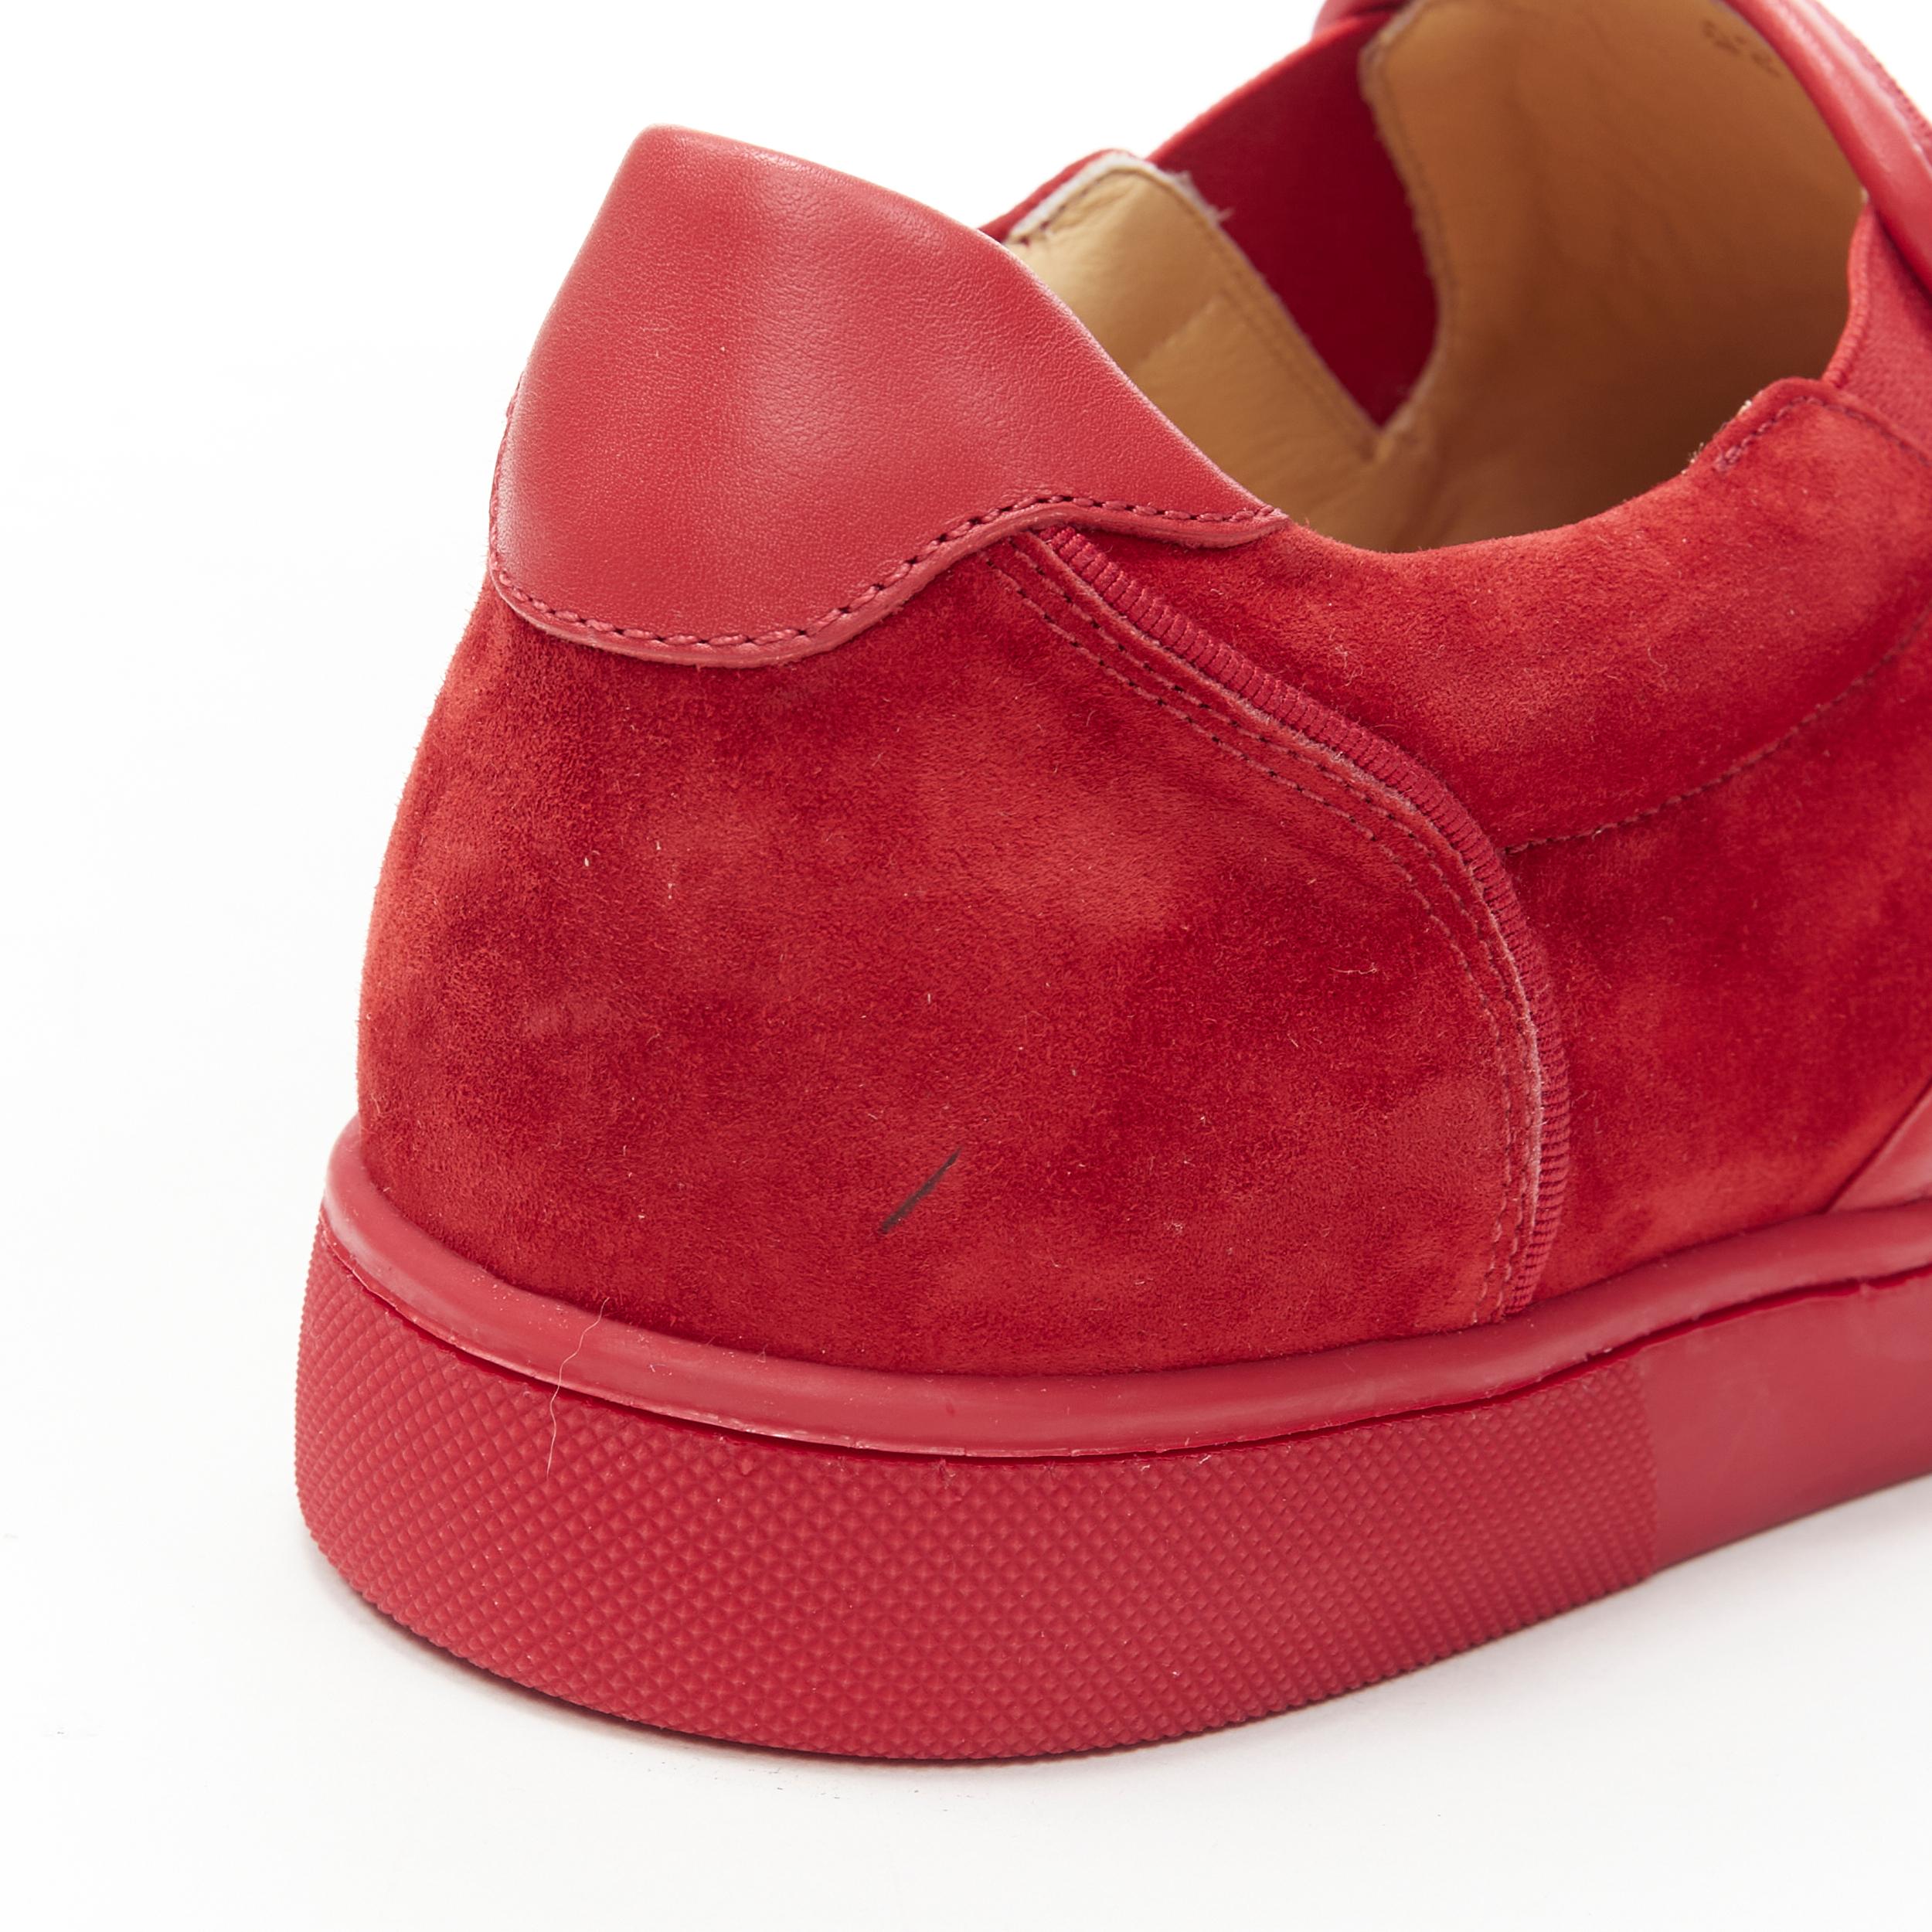 new CHRISTIAN LOUBOUTIN Sailor Boat red suede degrade strass low sneaker EU41.5 2